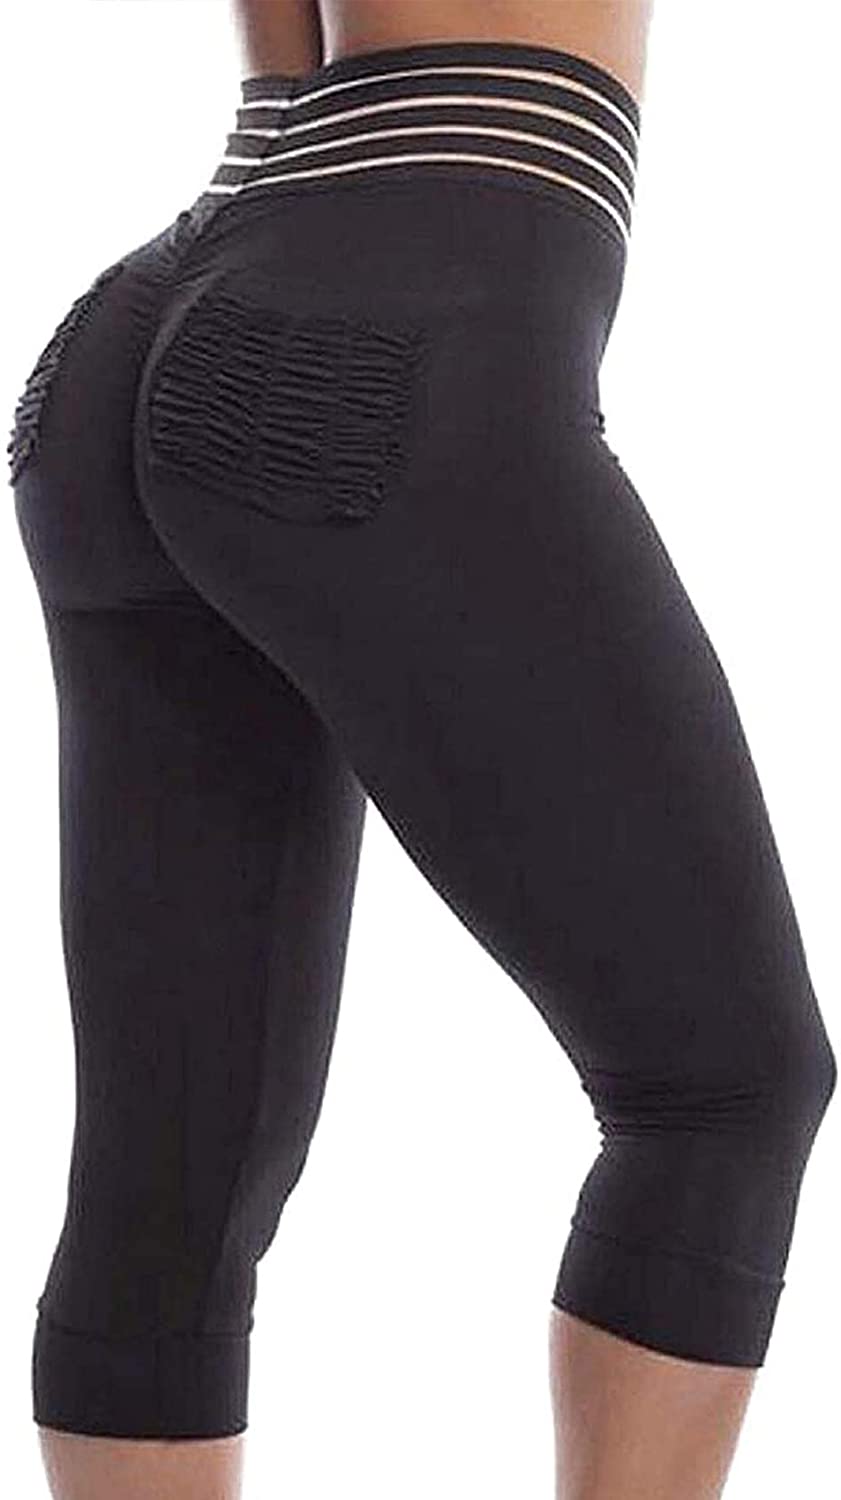 SEASUM Seamless Workout Leggings Women's High Waisted Fitness Yoga Pants  Butt Lifting Stretchy Tummy Control, #0 Camo Black, X-Small : Buy Online at  Best Price in KSA - Souq is now 